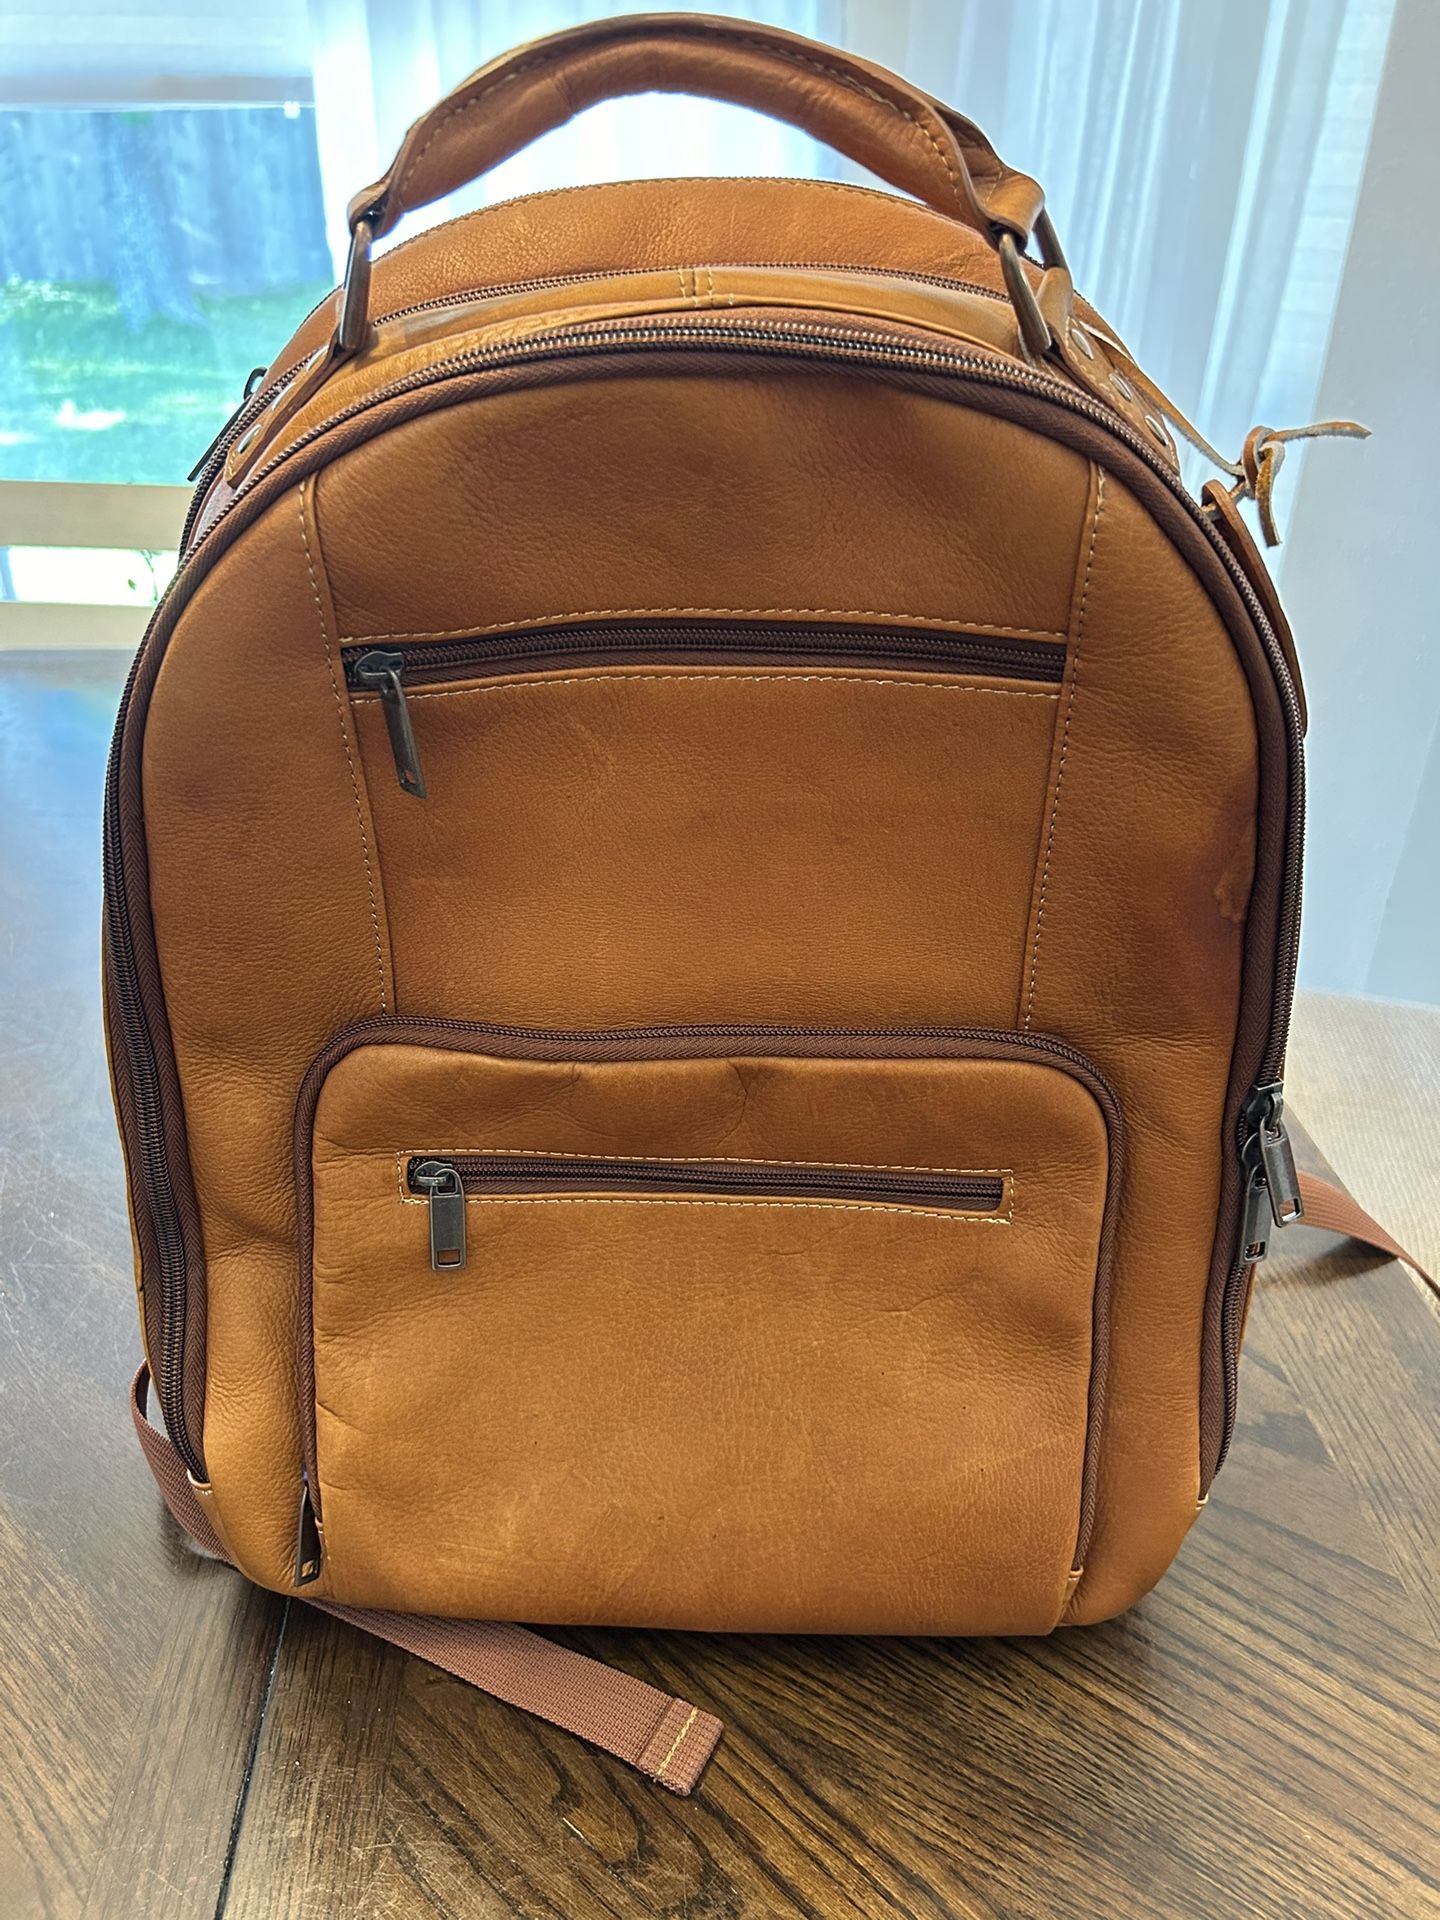 Wilson Leather Backpack